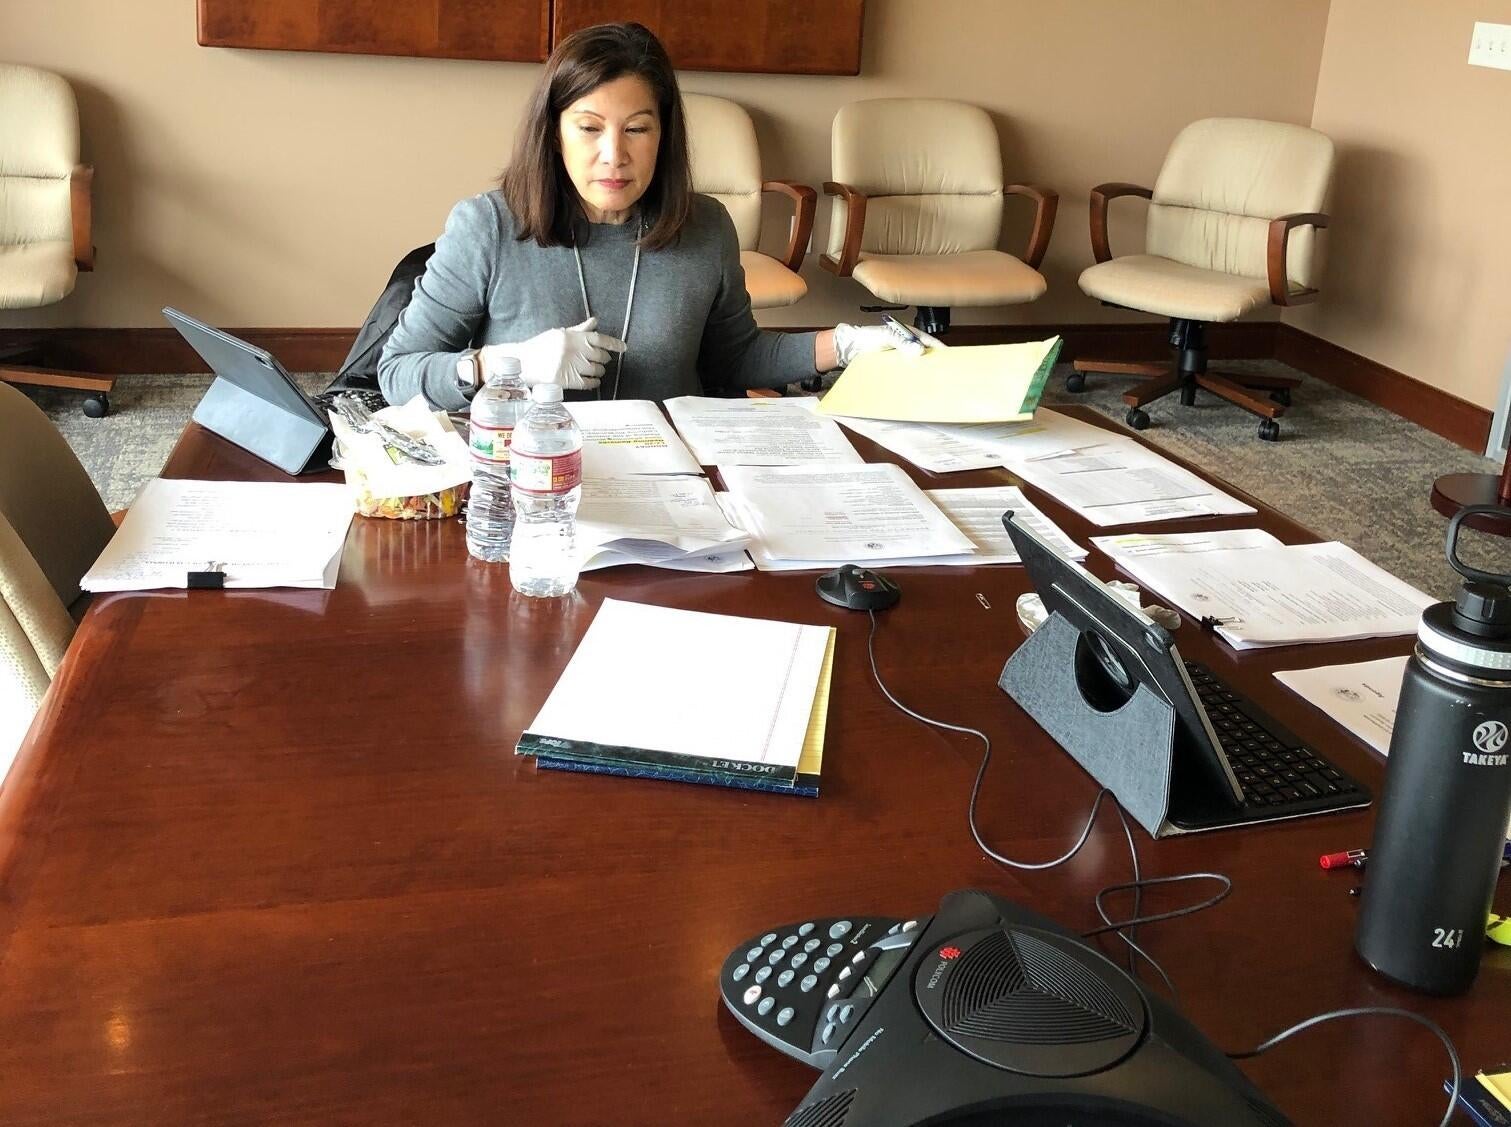 Judicial Council Chair, Chief Justice Tani G. Cantil-Sakauye ran the call from council&#39;s office in Sacramento.